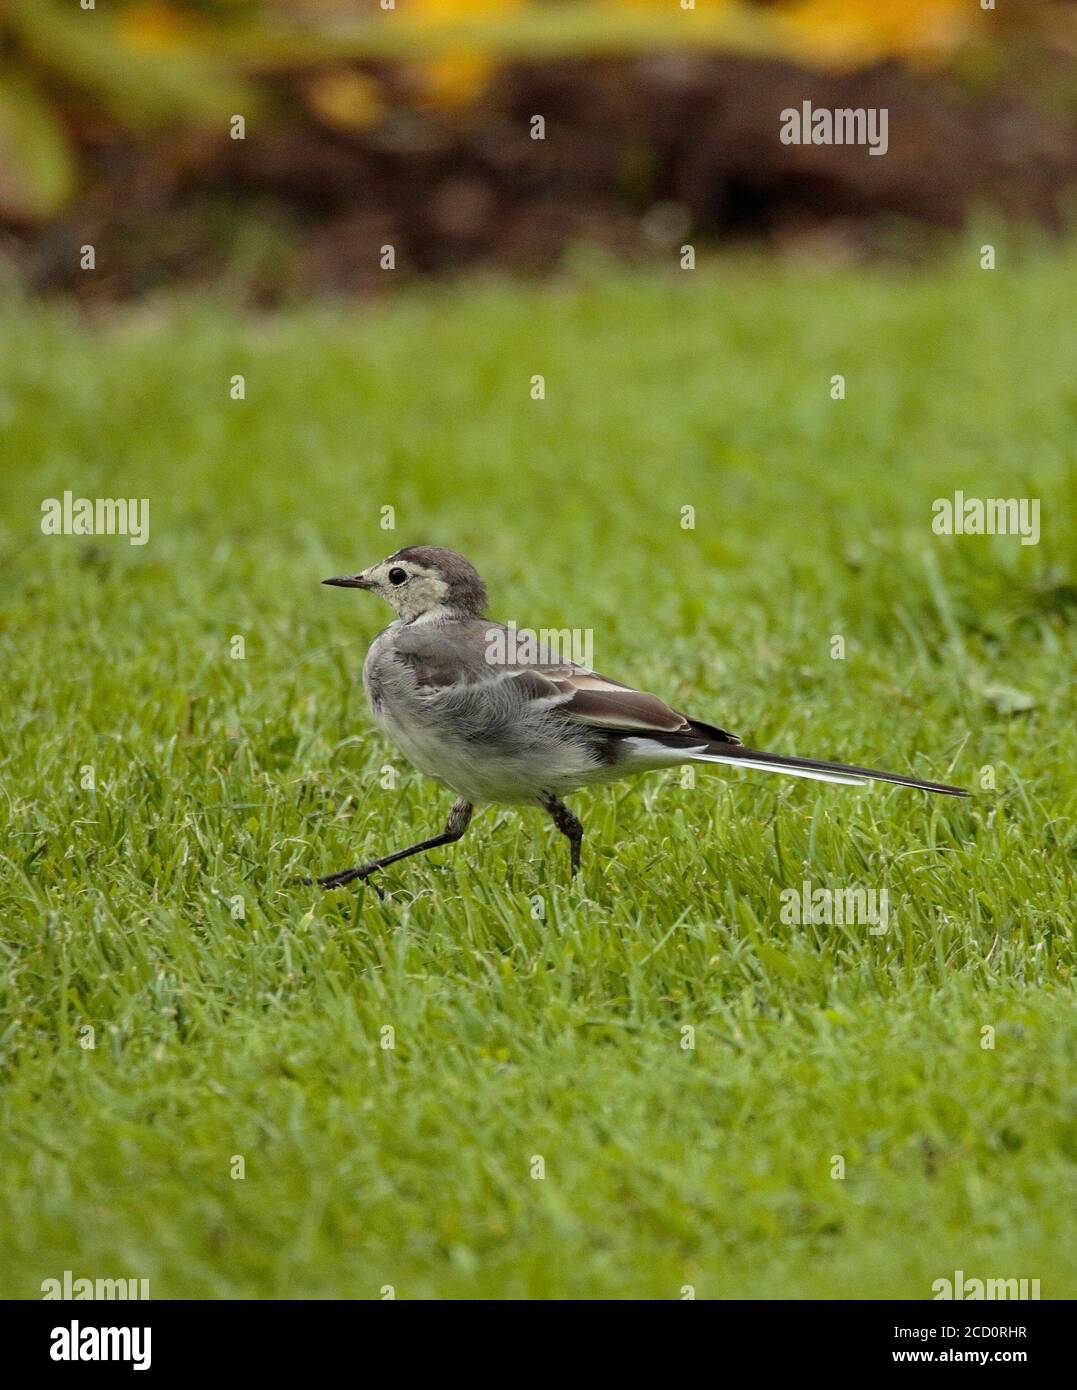 Pied Wagtail chasing insects. Stock Photo